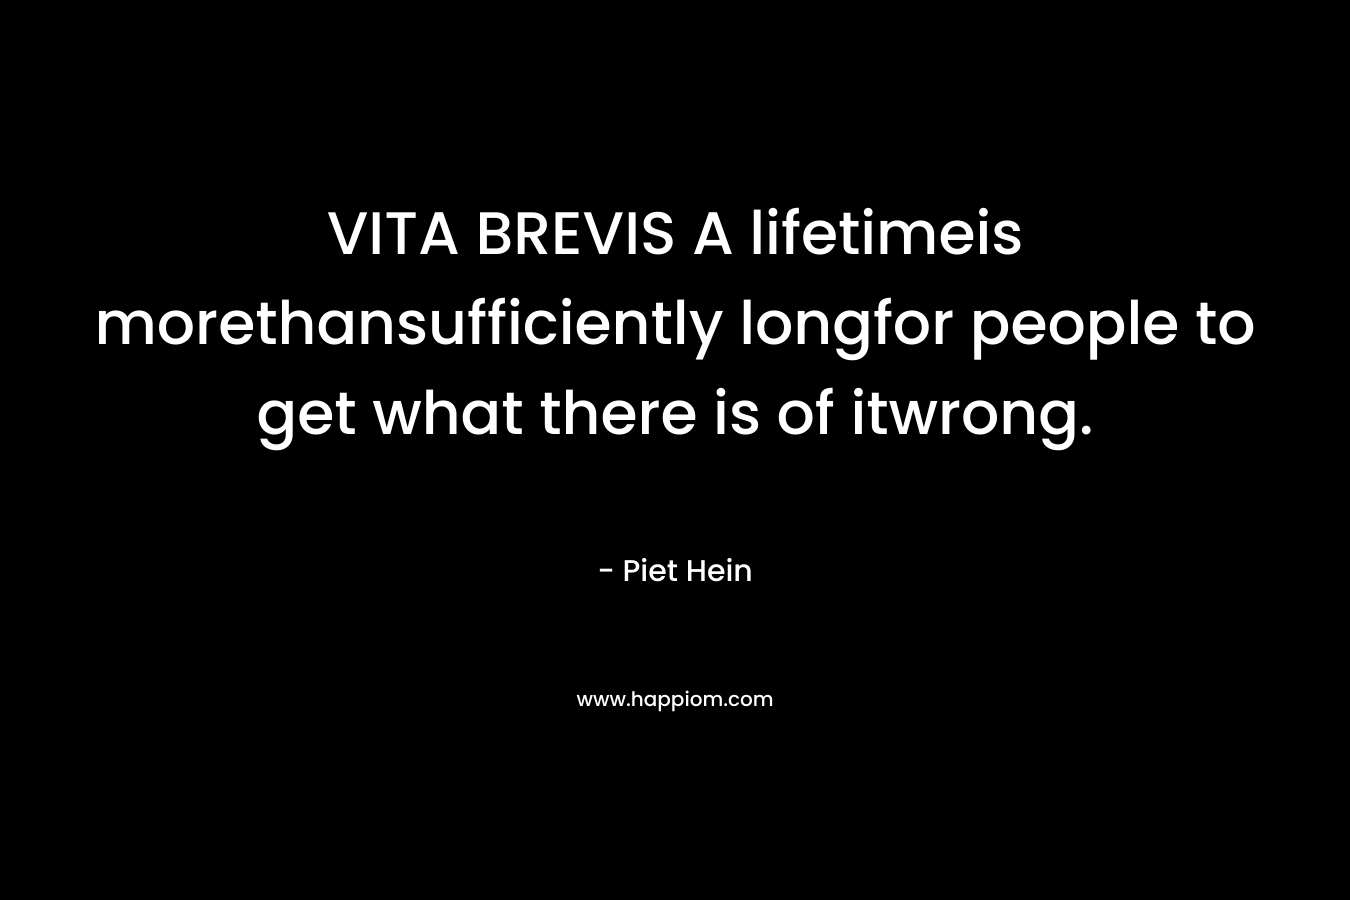 VITA BREVIS A lifetimeis morethansufficiently longfor people to get what there is of itwrong.